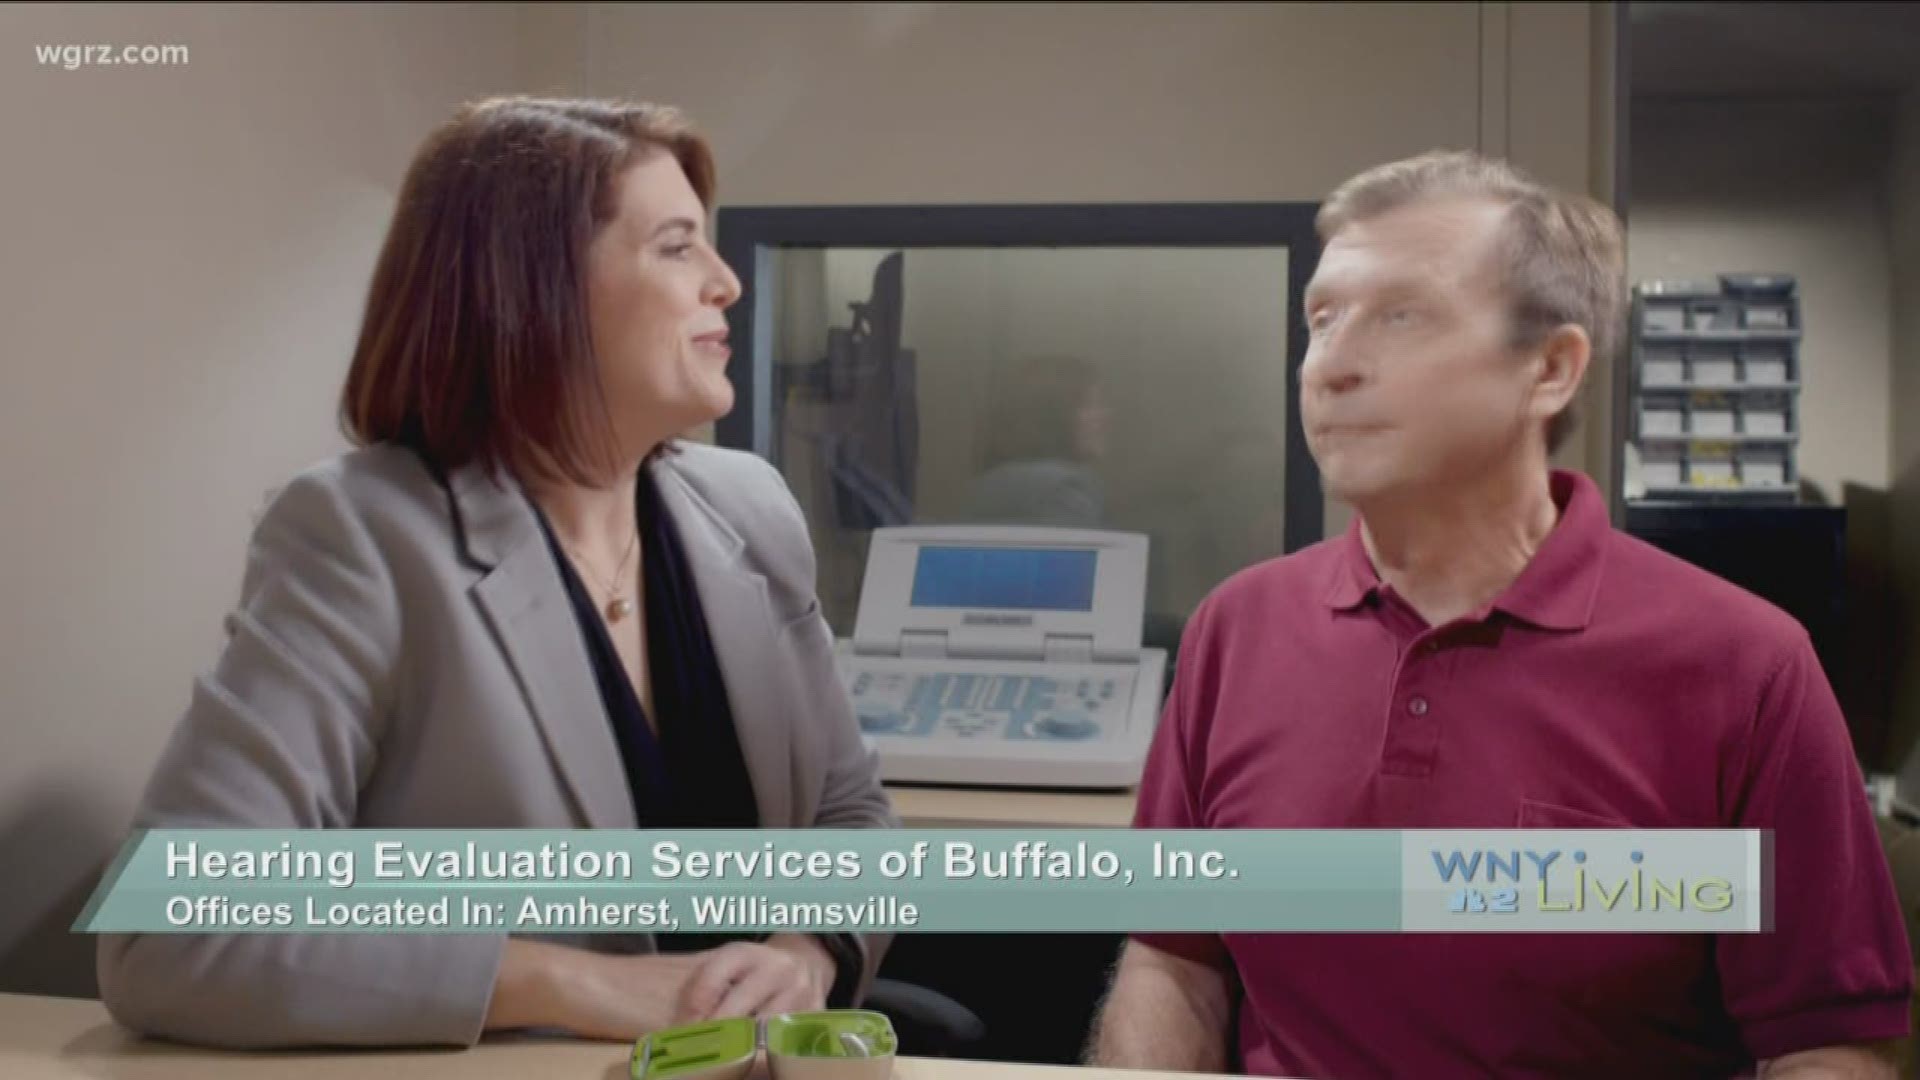 November 2 - Hearing Evaluation Services of Buffalo (THIS VIDEO IS SPONSORED BY HEARING EVALUATION SERVICES OF BUFFALO)